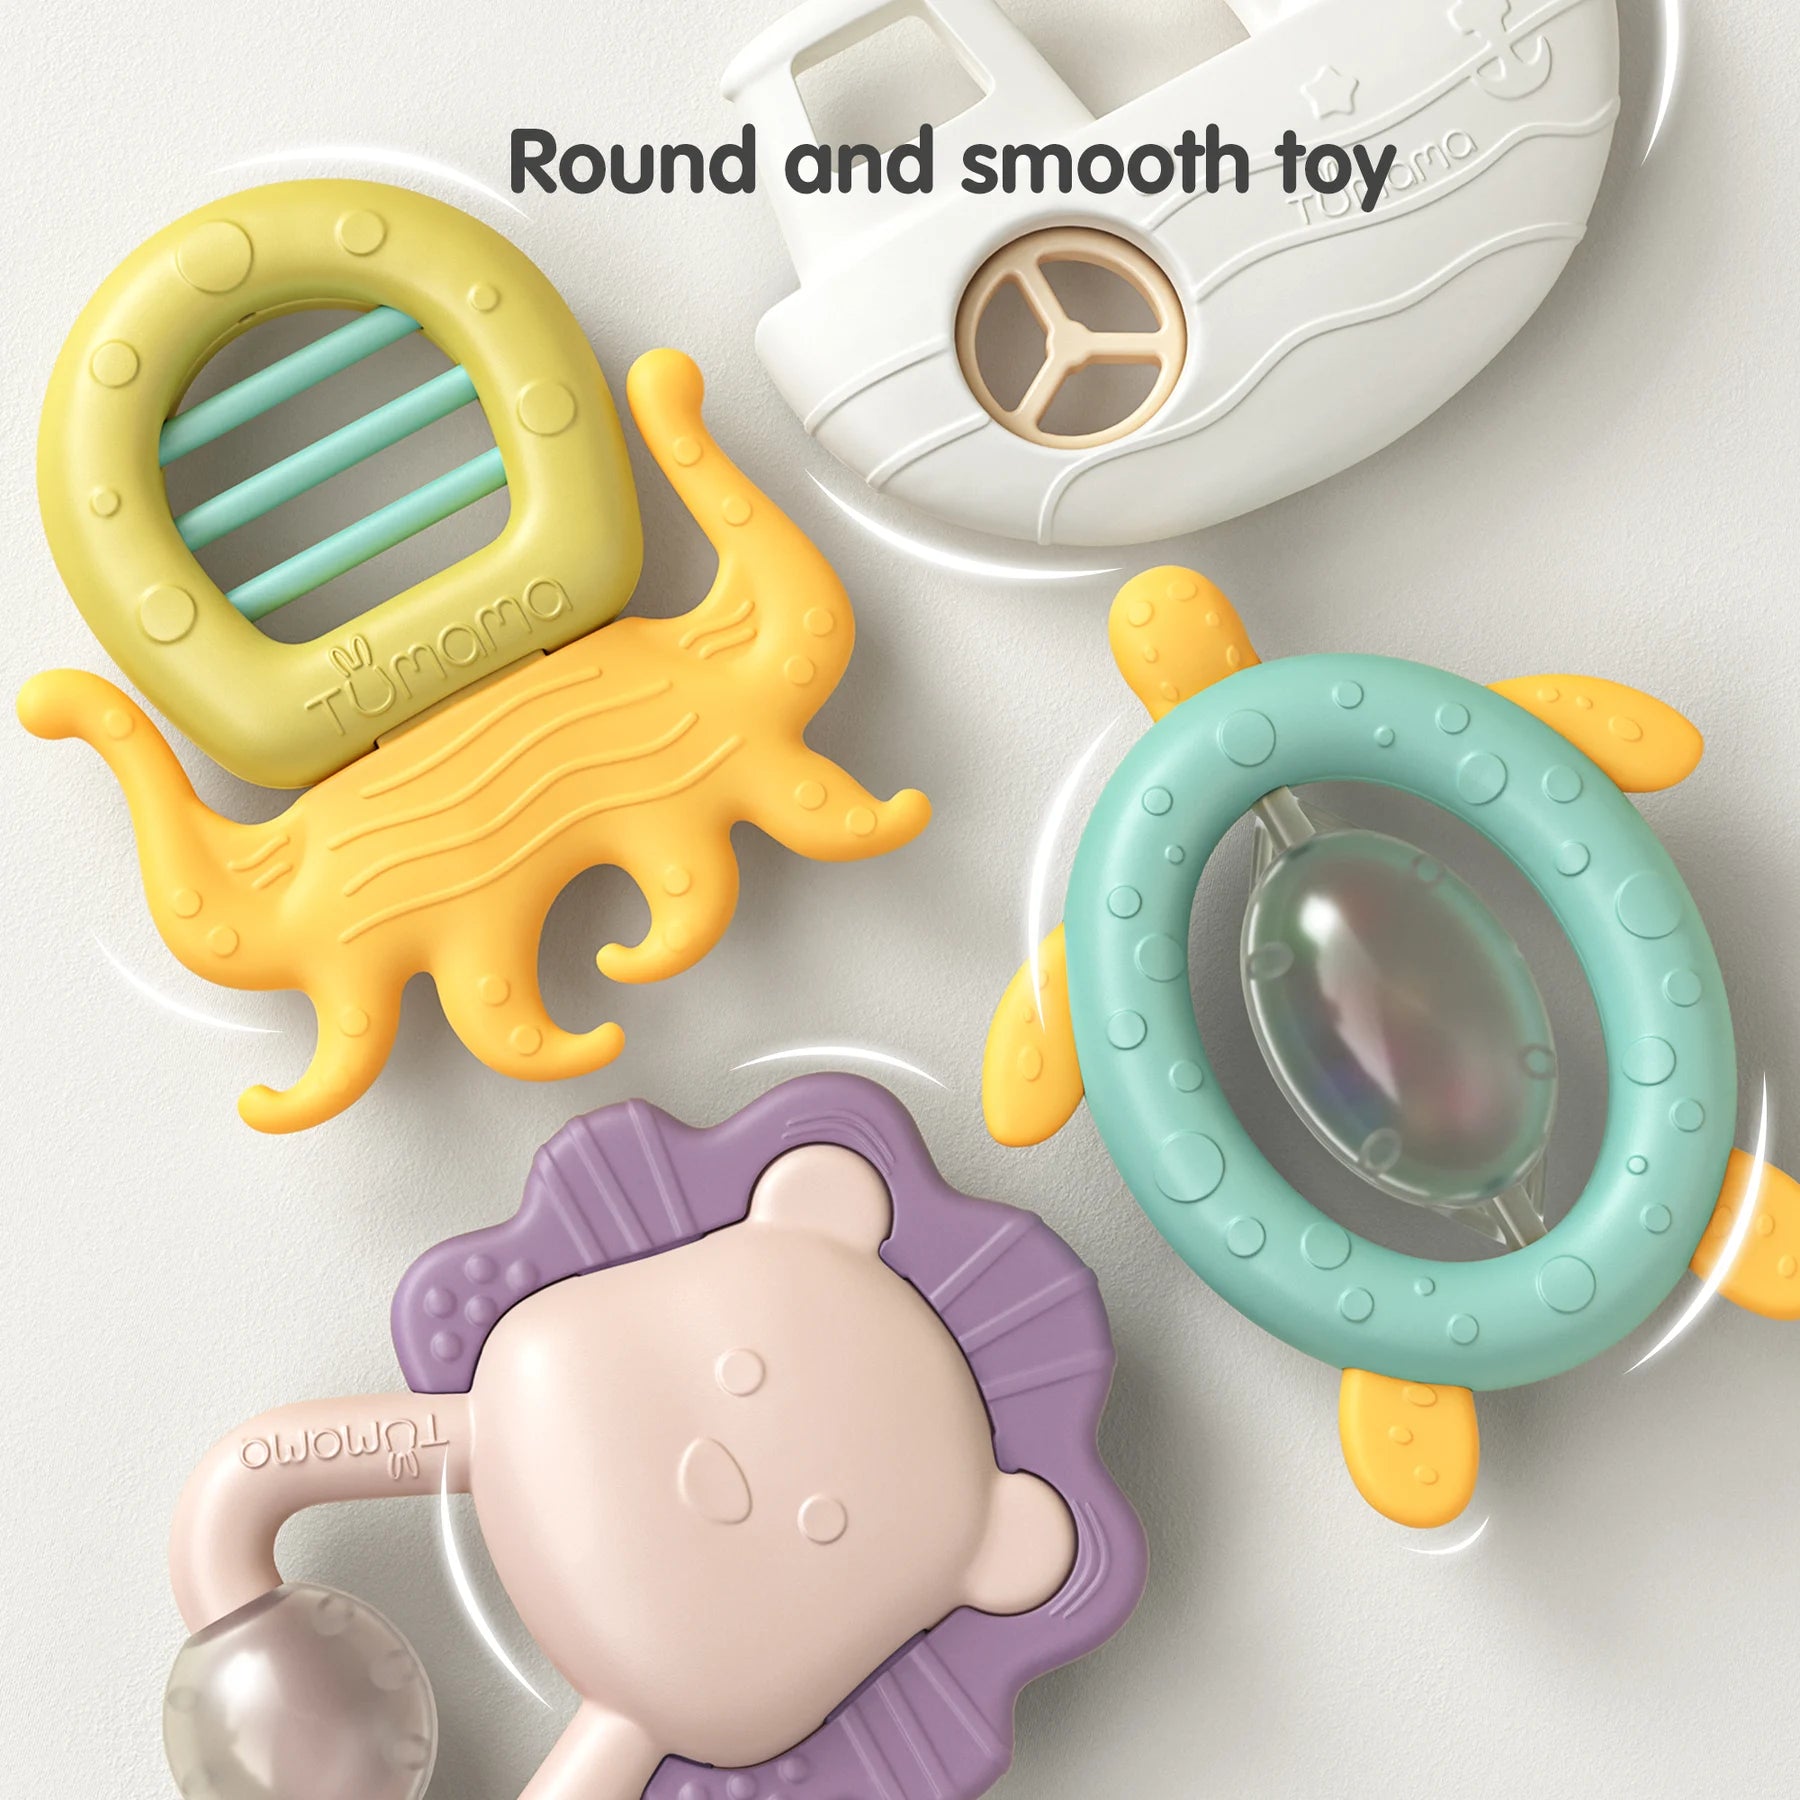 Baby rattle teether toys shake grab baby toy,early developmental plaything teething toy set 10pcs for babies 0 Month+